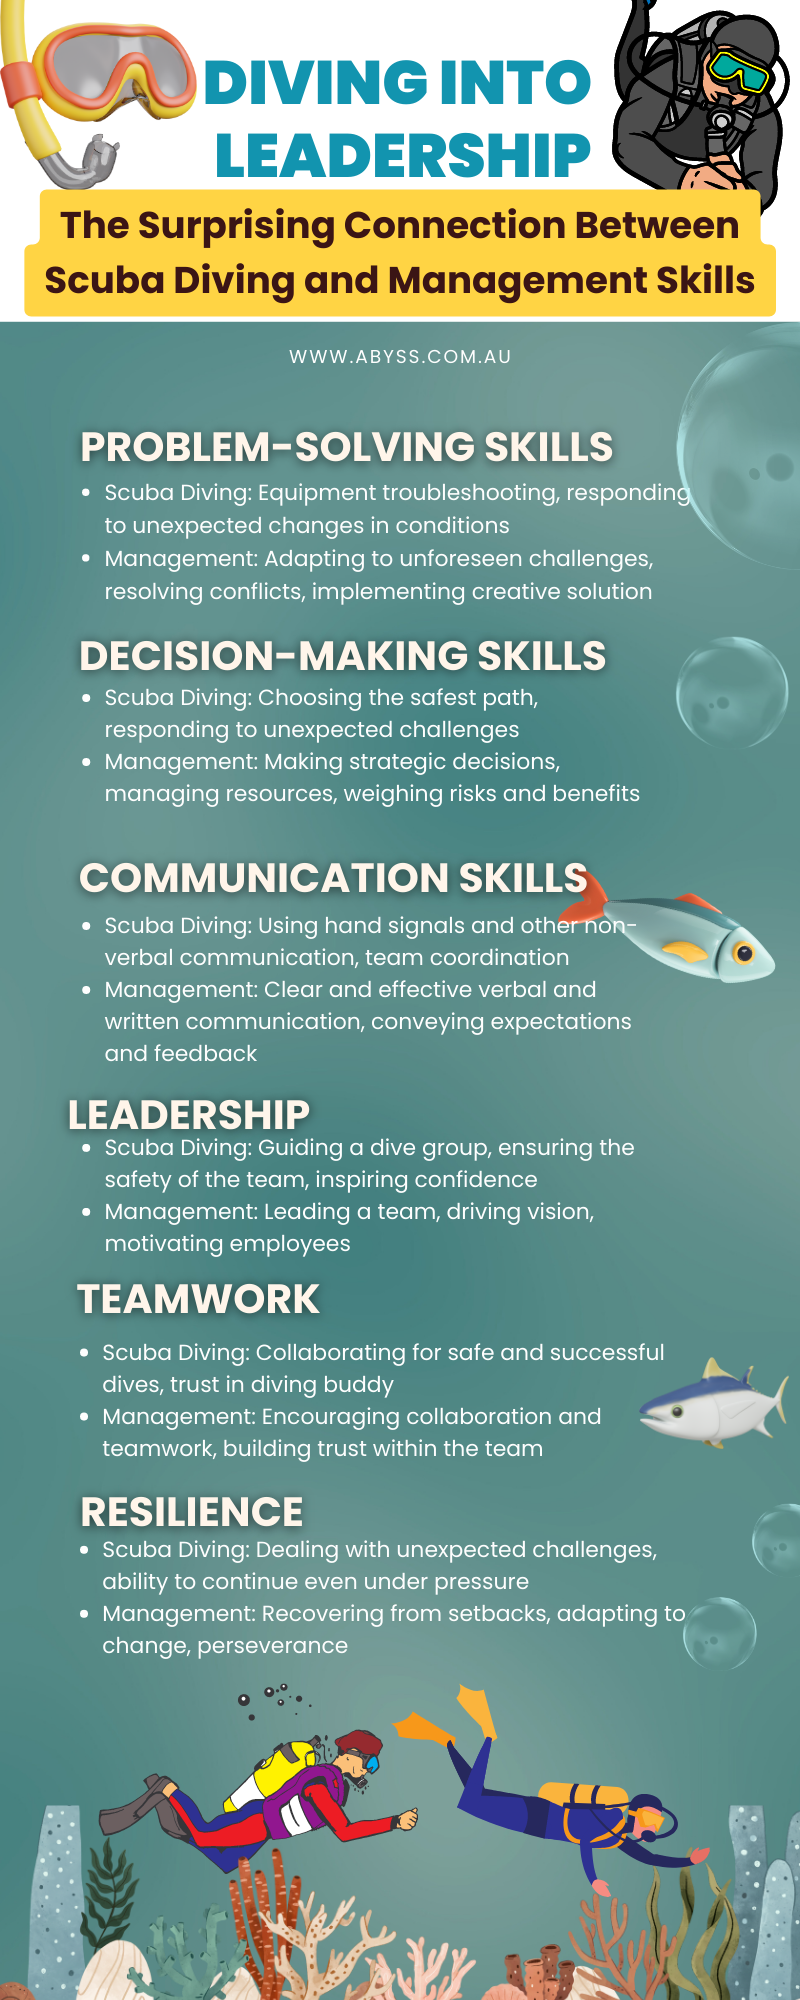 Diving into Leadership: Discovering the Surprising Connection Between Scuba Diving and Management Skills